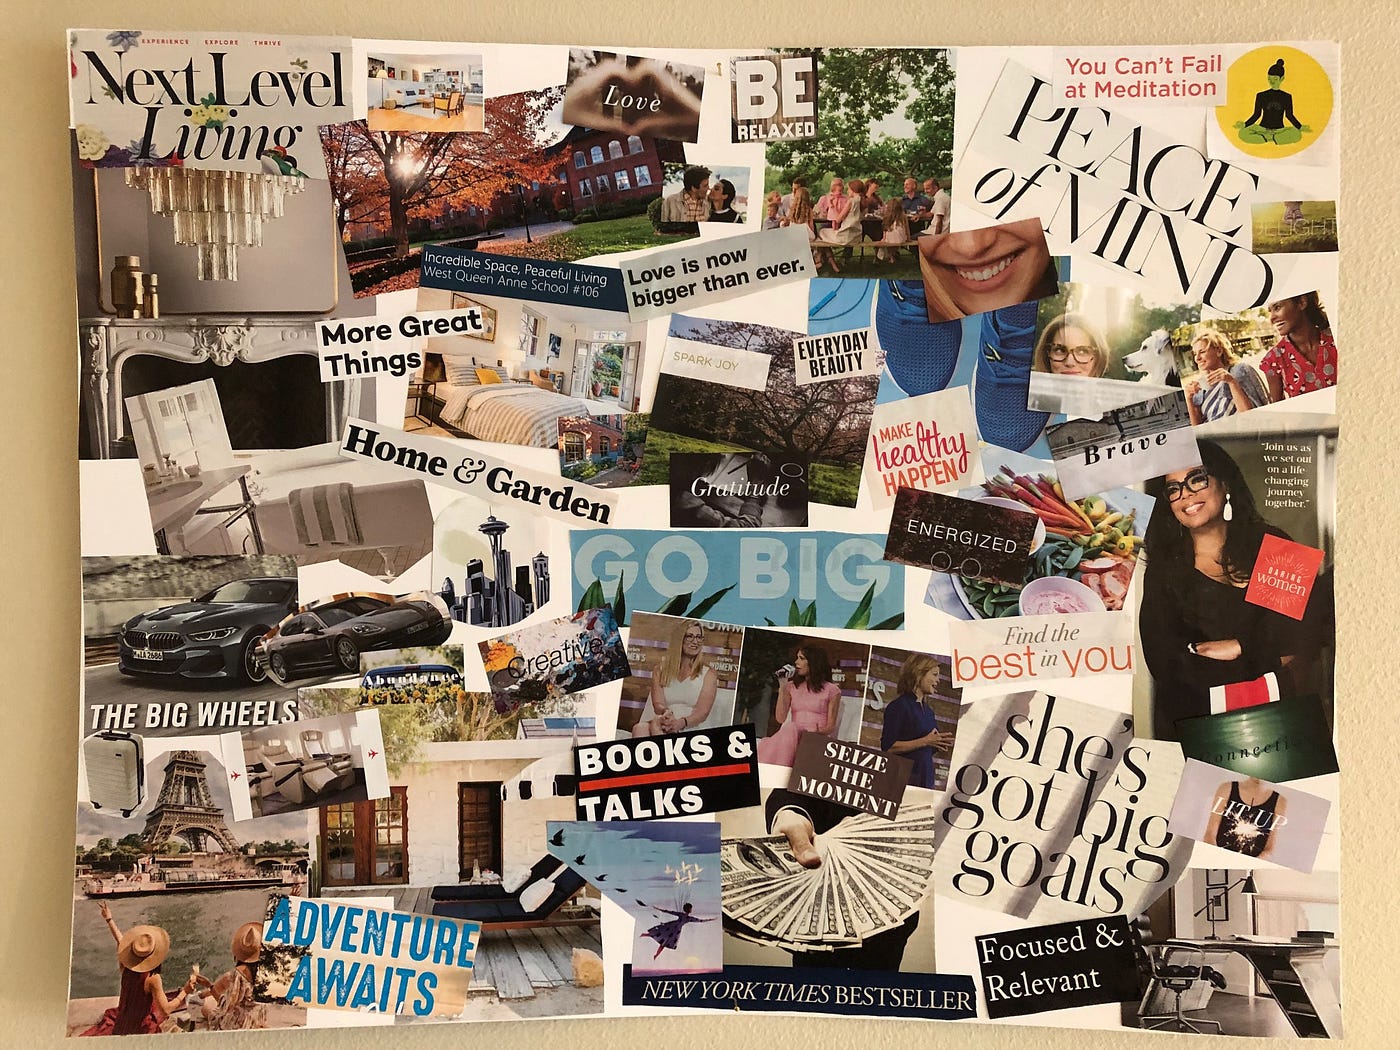 Tips For Crafting The Ultimate Vision Board To Bring Your Dreams